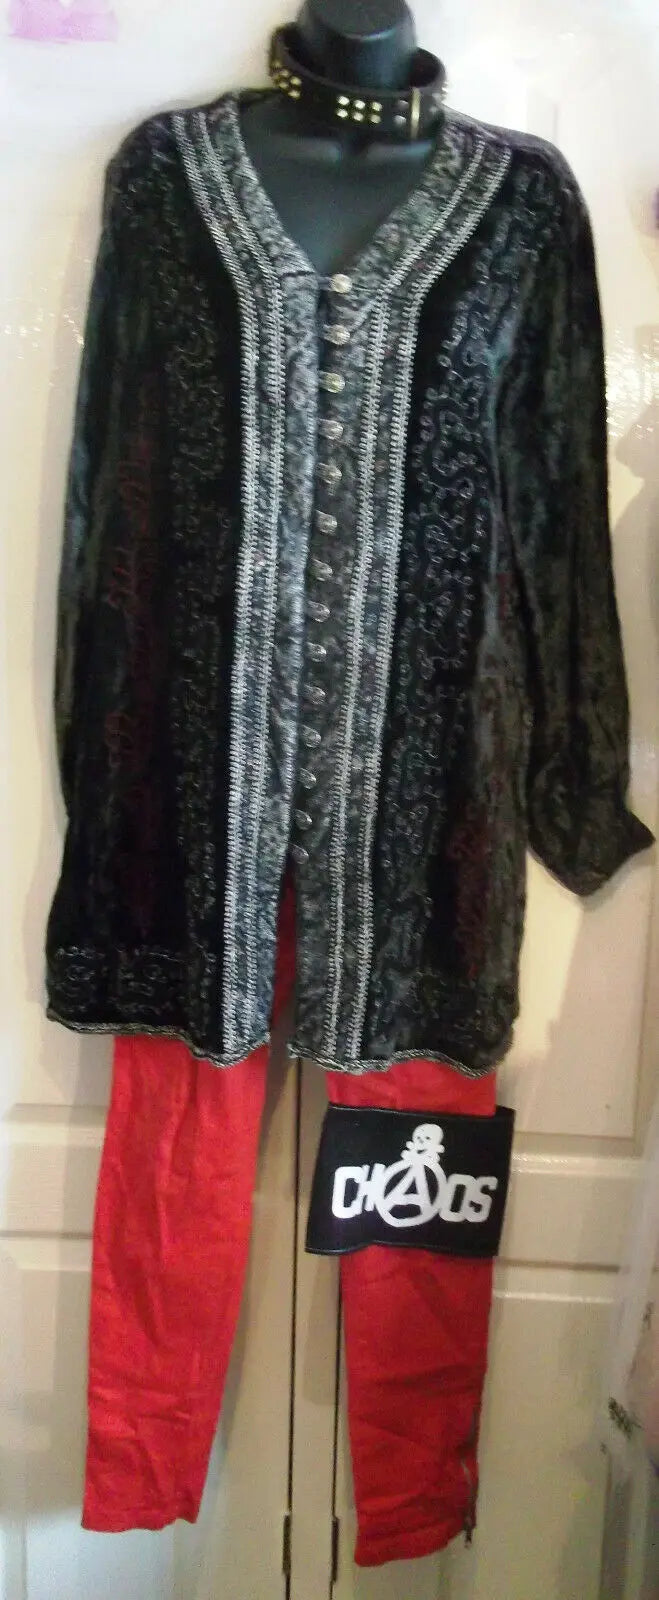 gorgeous eastern touches velvet tunic ladies top.size m/l -loose. lace up front eastern touches